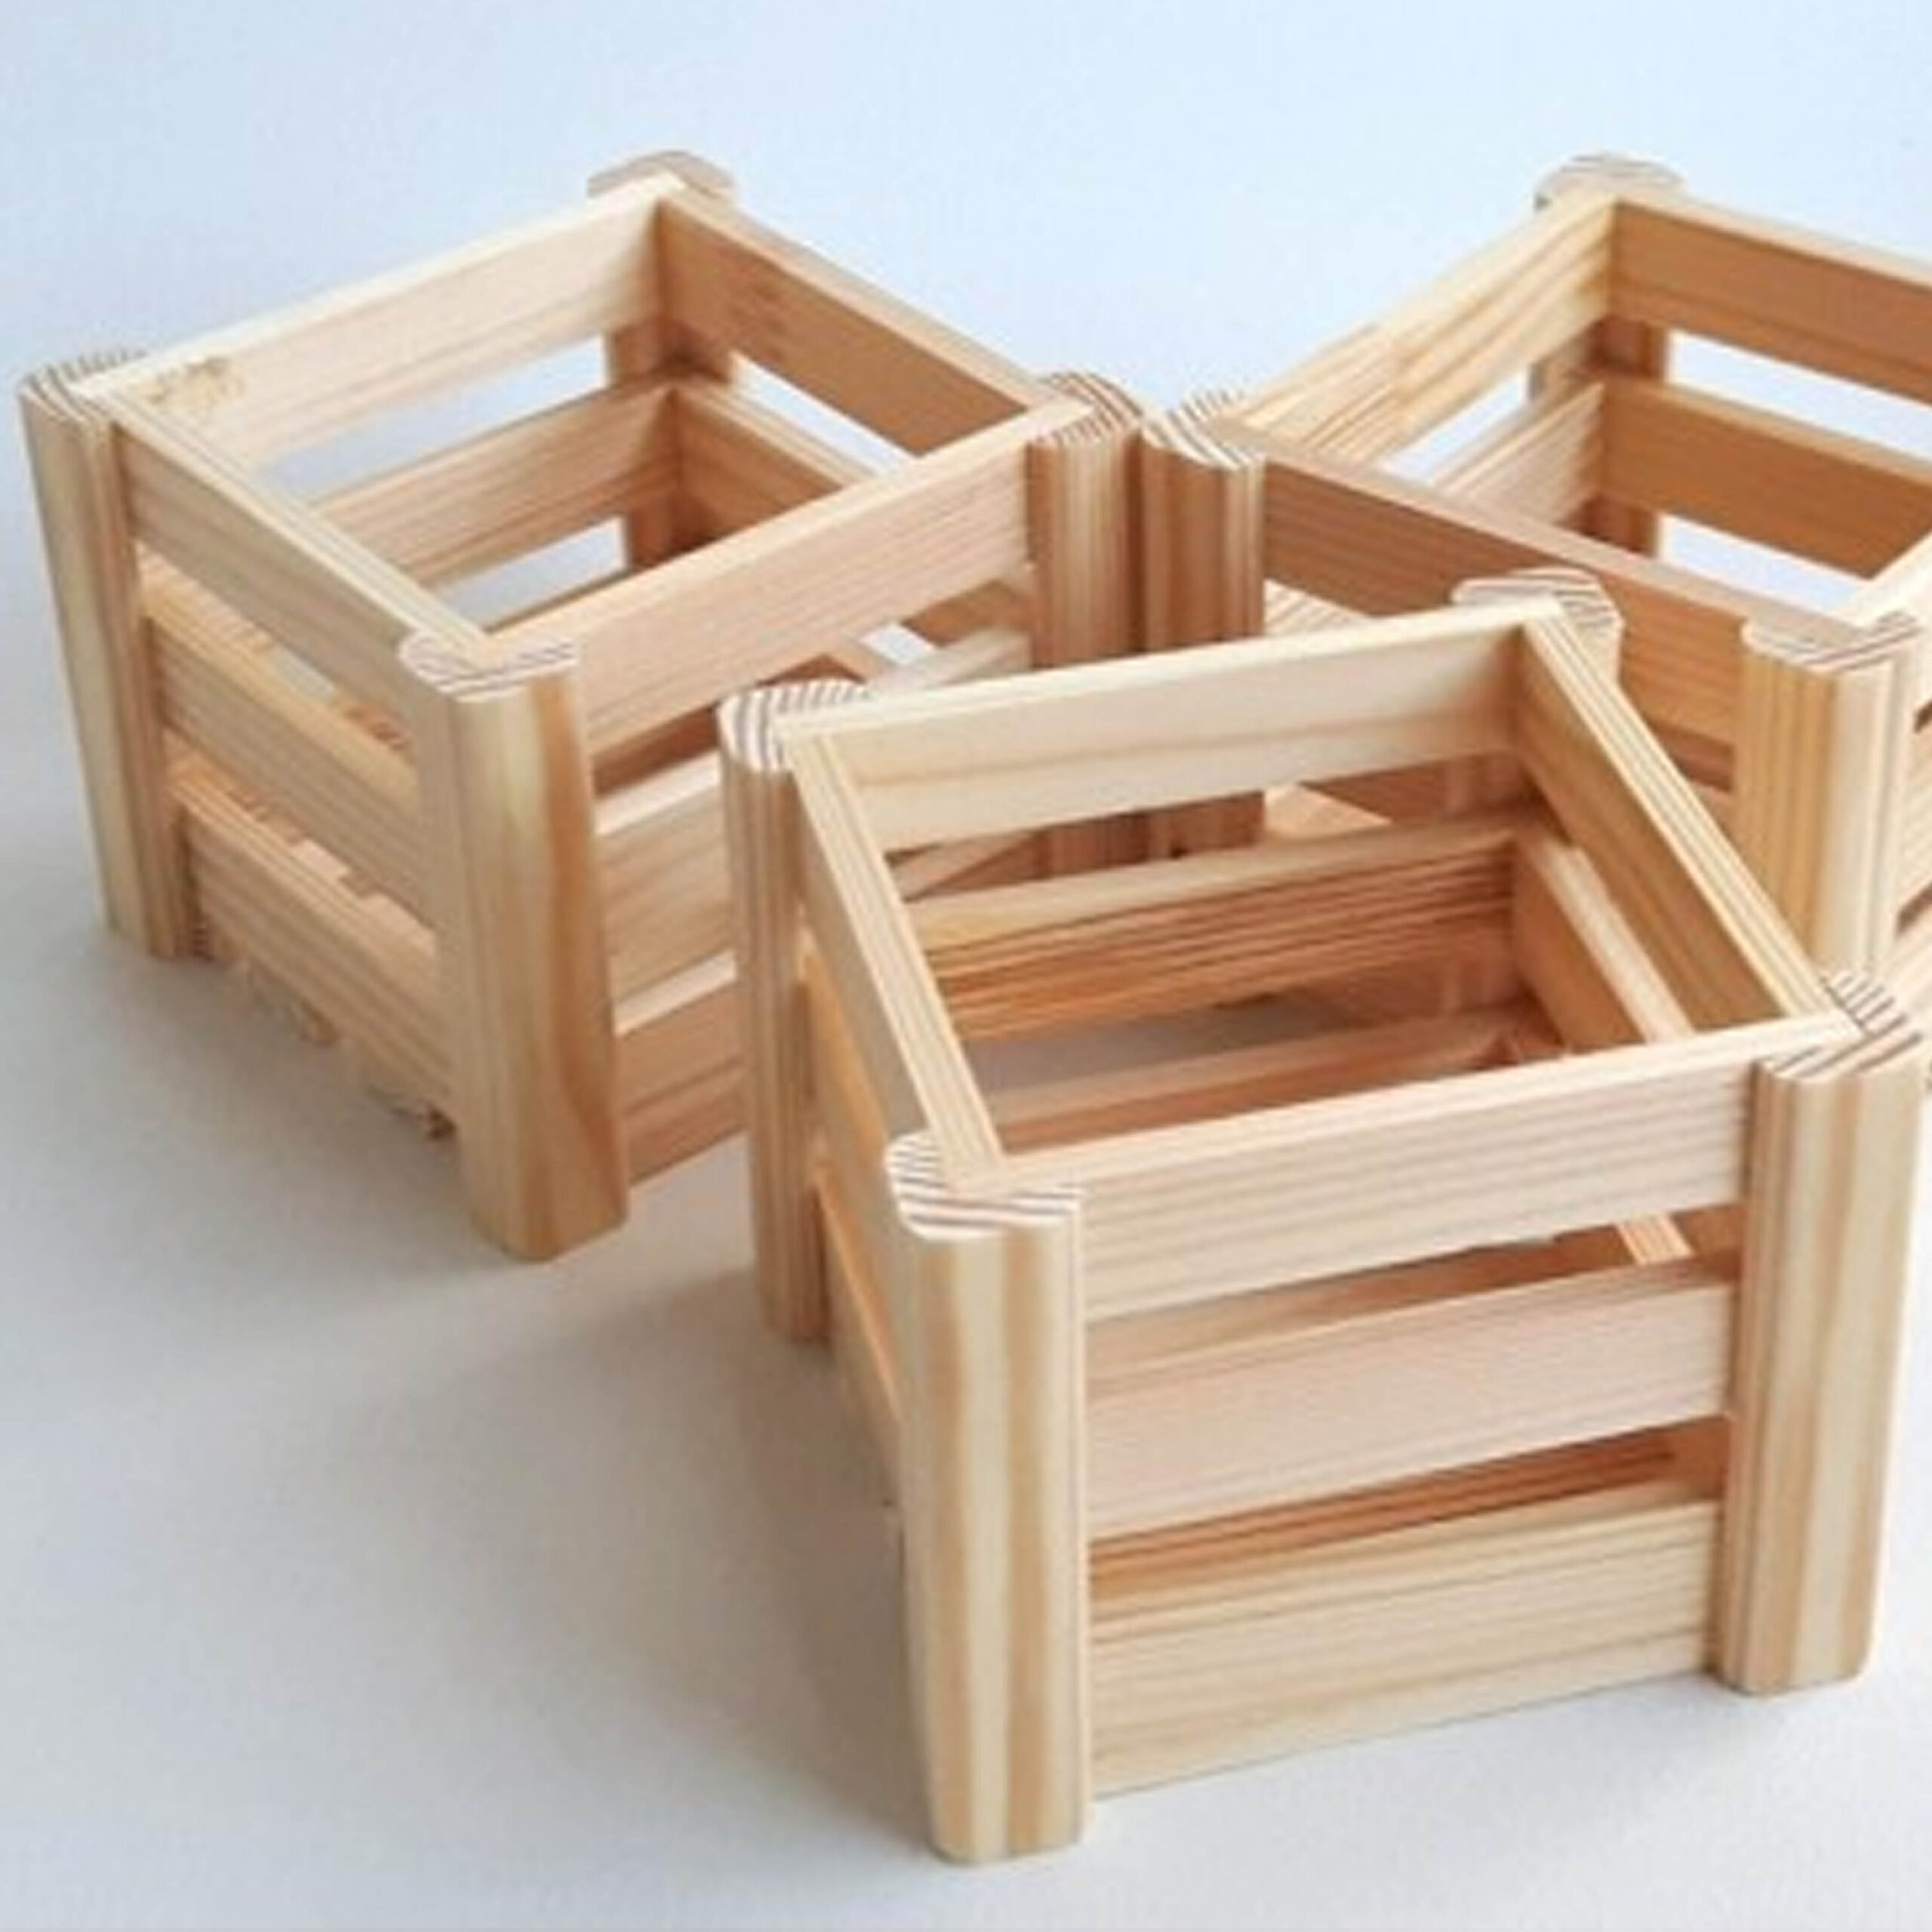 NATURAL WOODEN CRATE 14x14.5x11.5cm